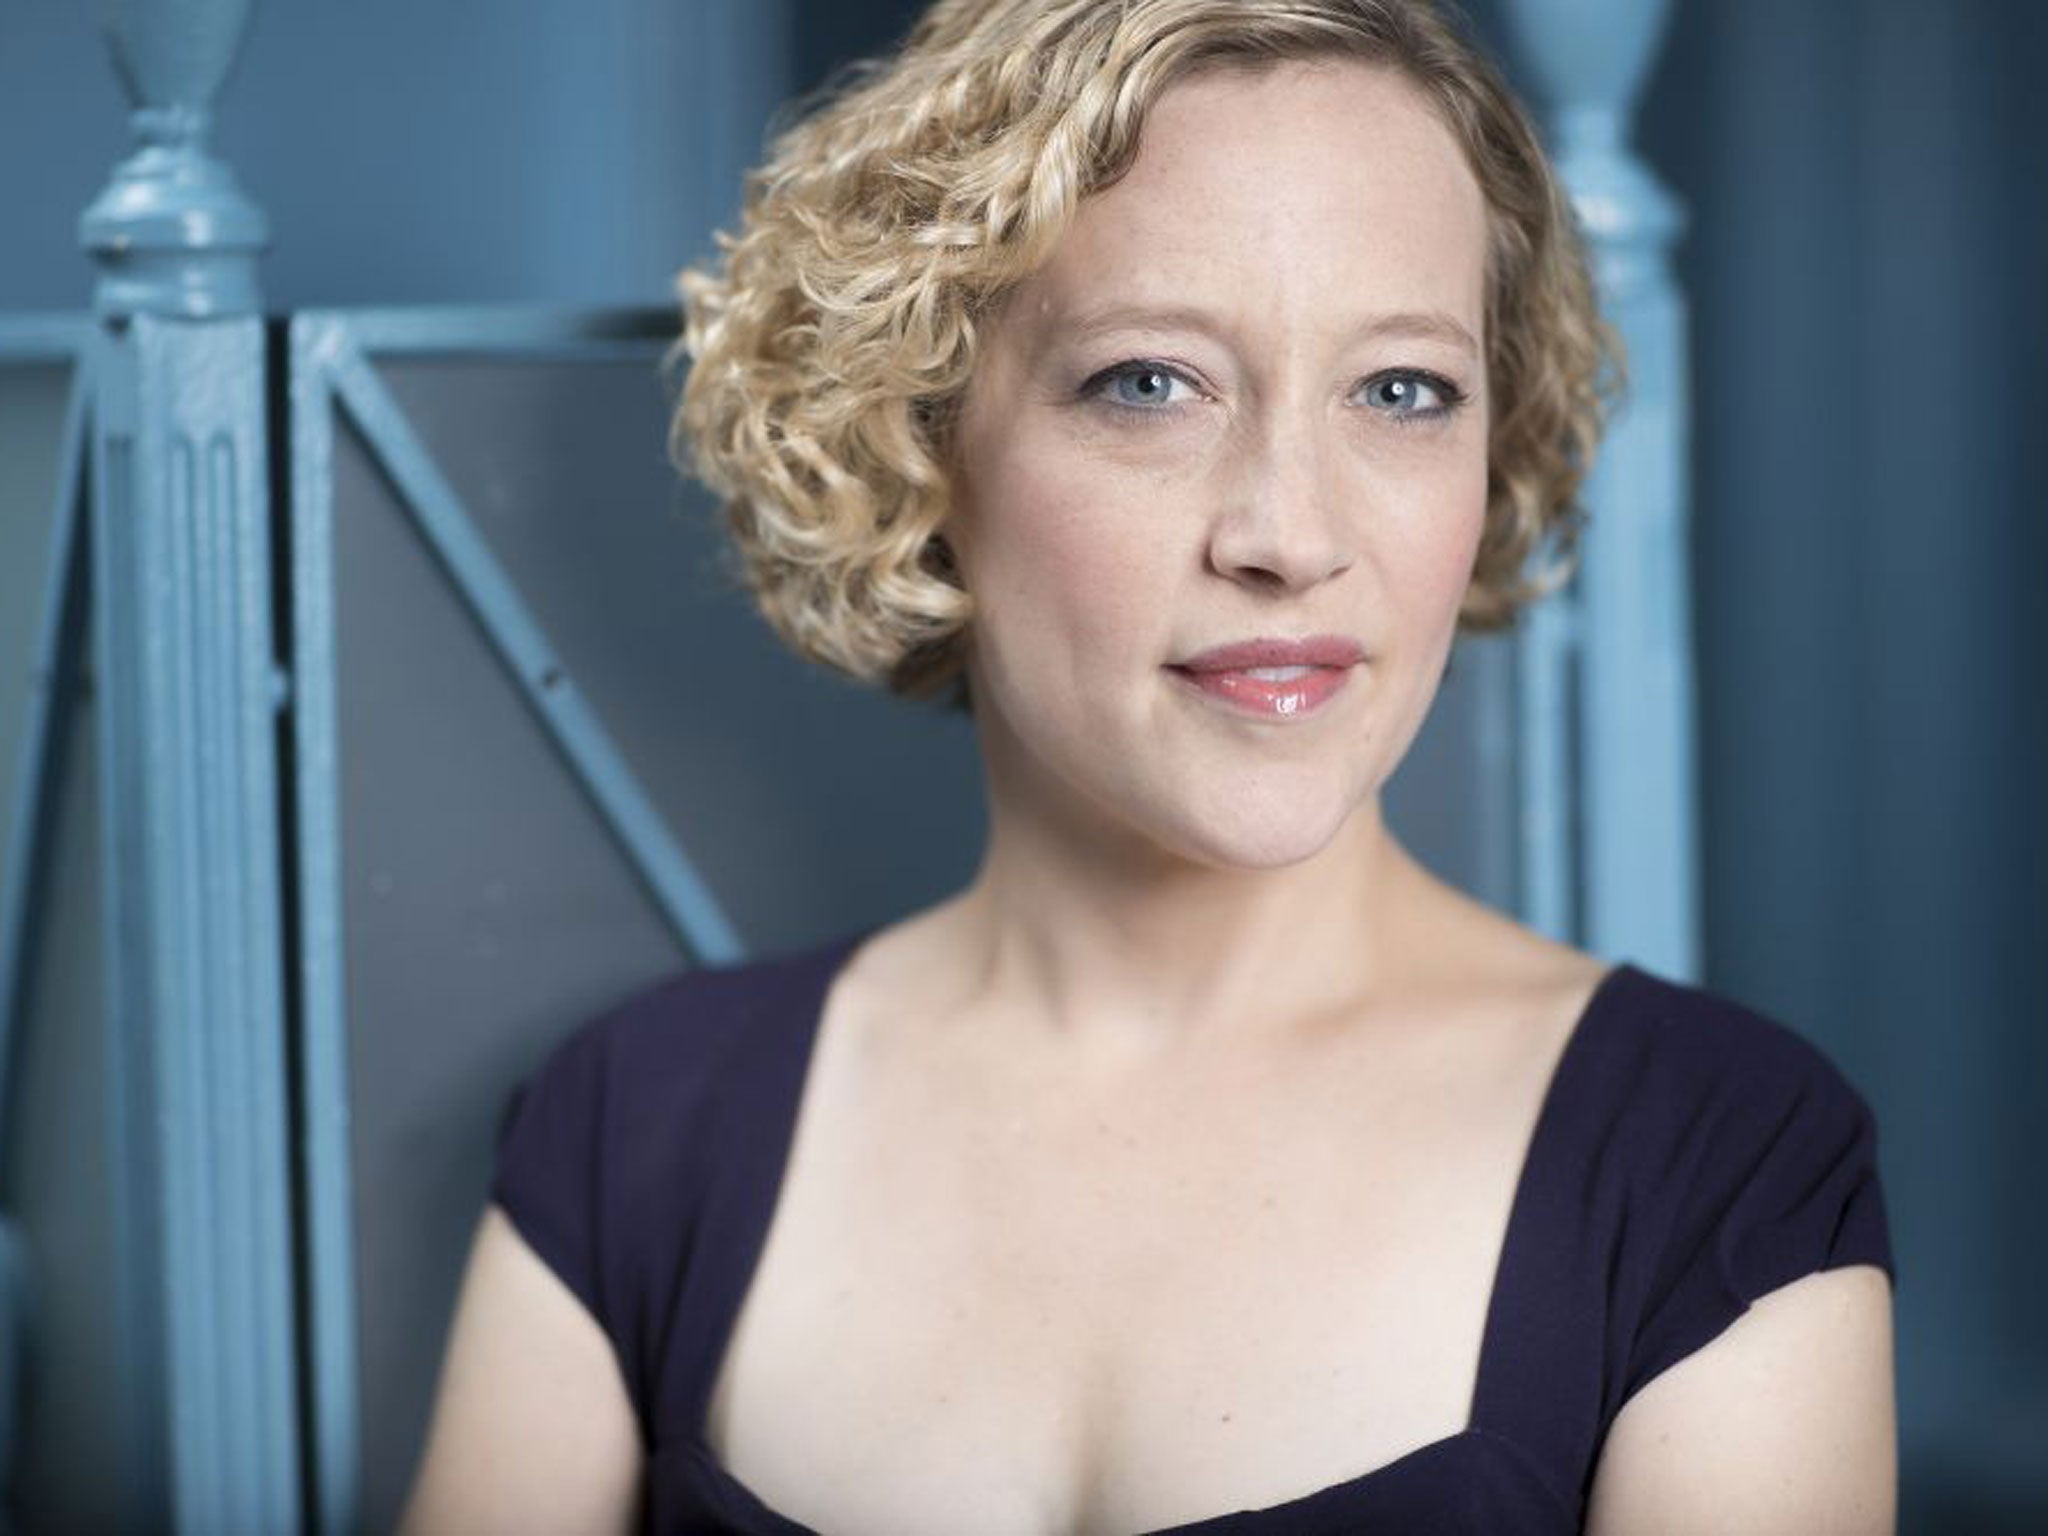 Channel 4 newsreader Cathy Newman says public humiliation is the answer for sexist remarks | The Independent | The Independent